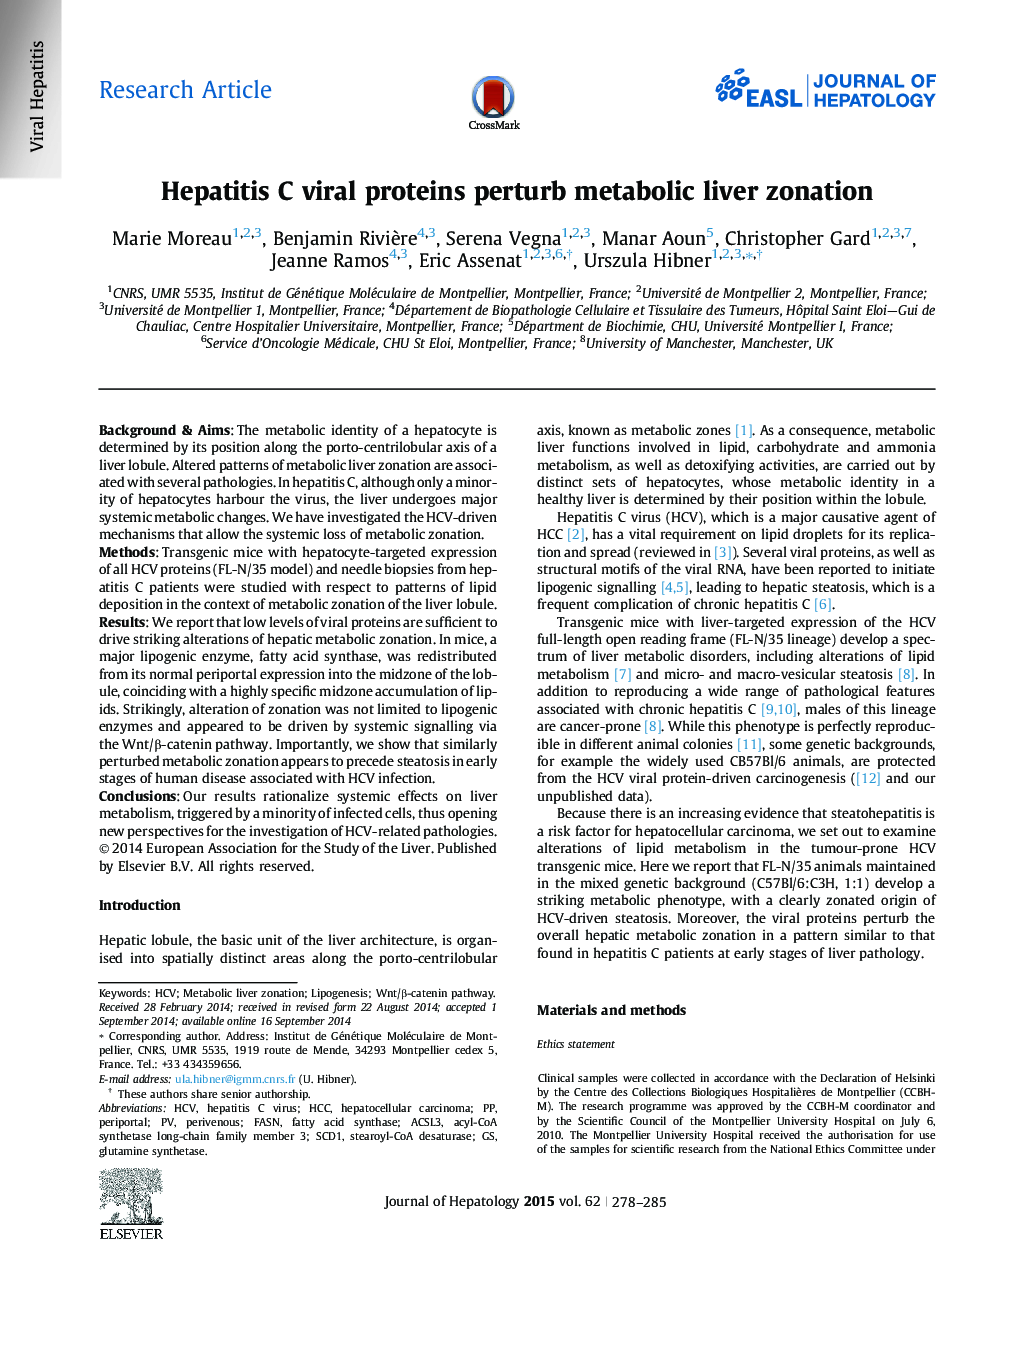 Research ArticleHepatitis C viral proteins perturb metabolic liver zonation